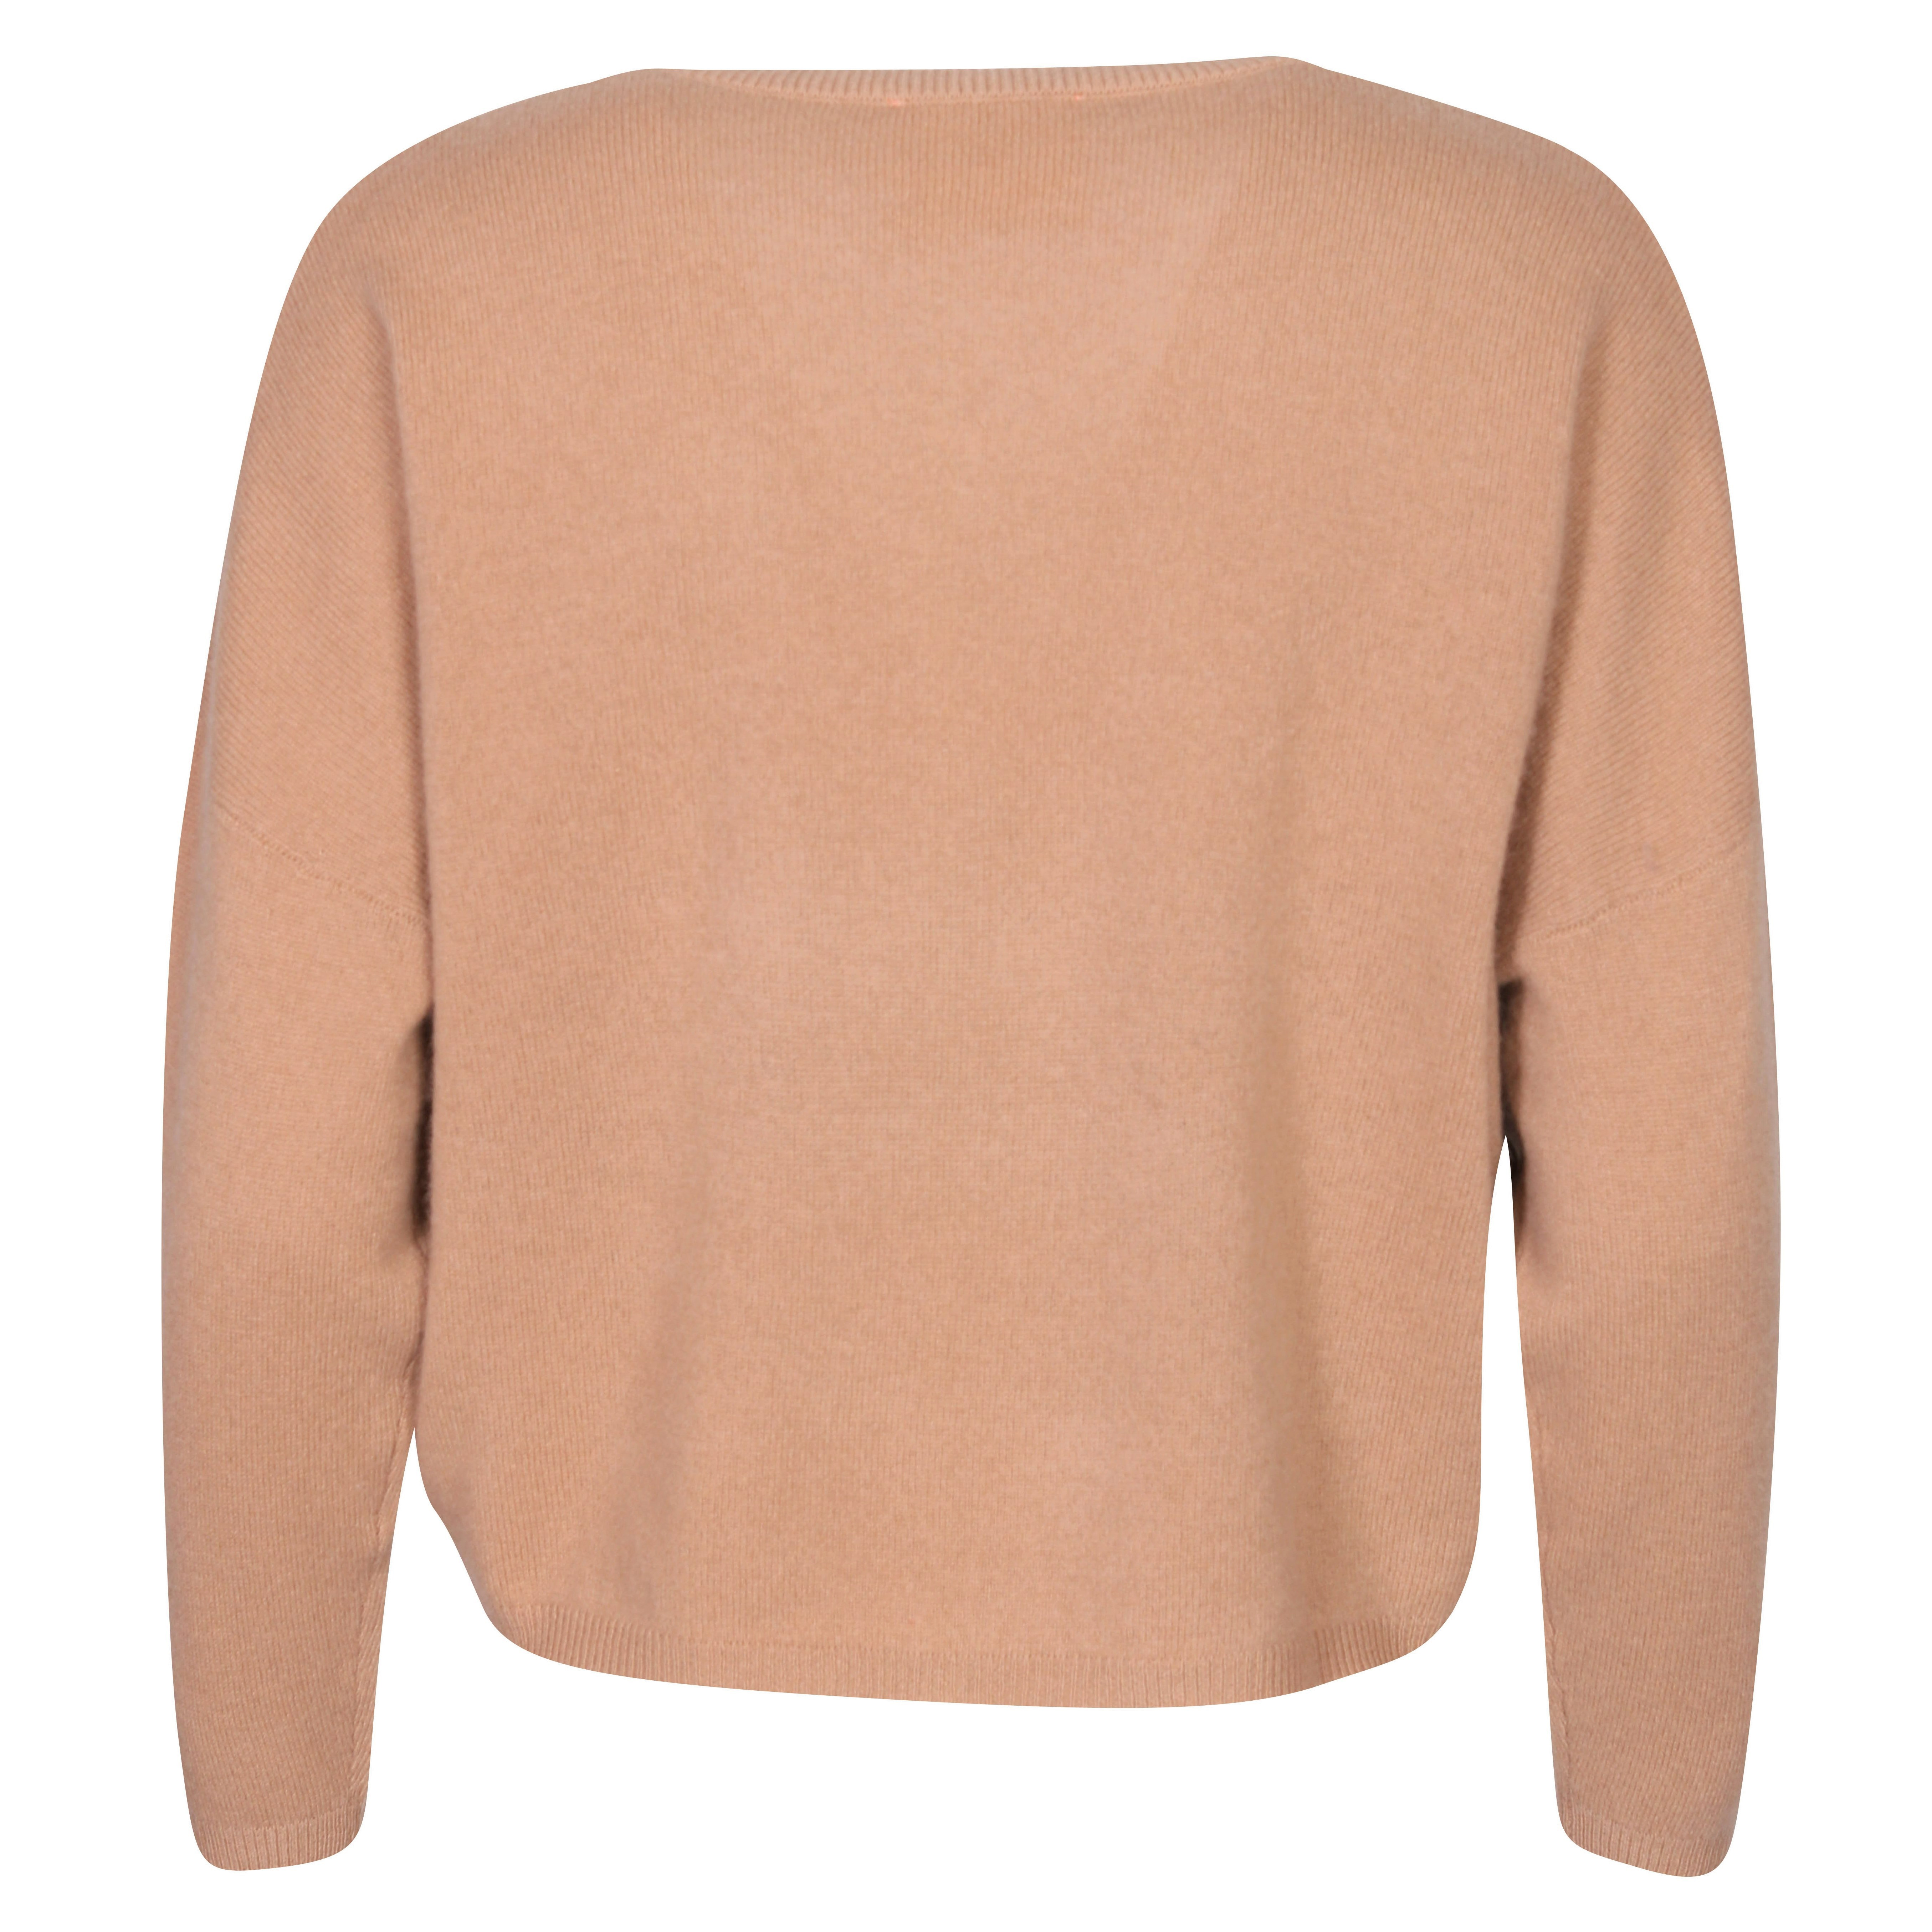 Absolut Cashmere Alicia Pullover in Camel XS